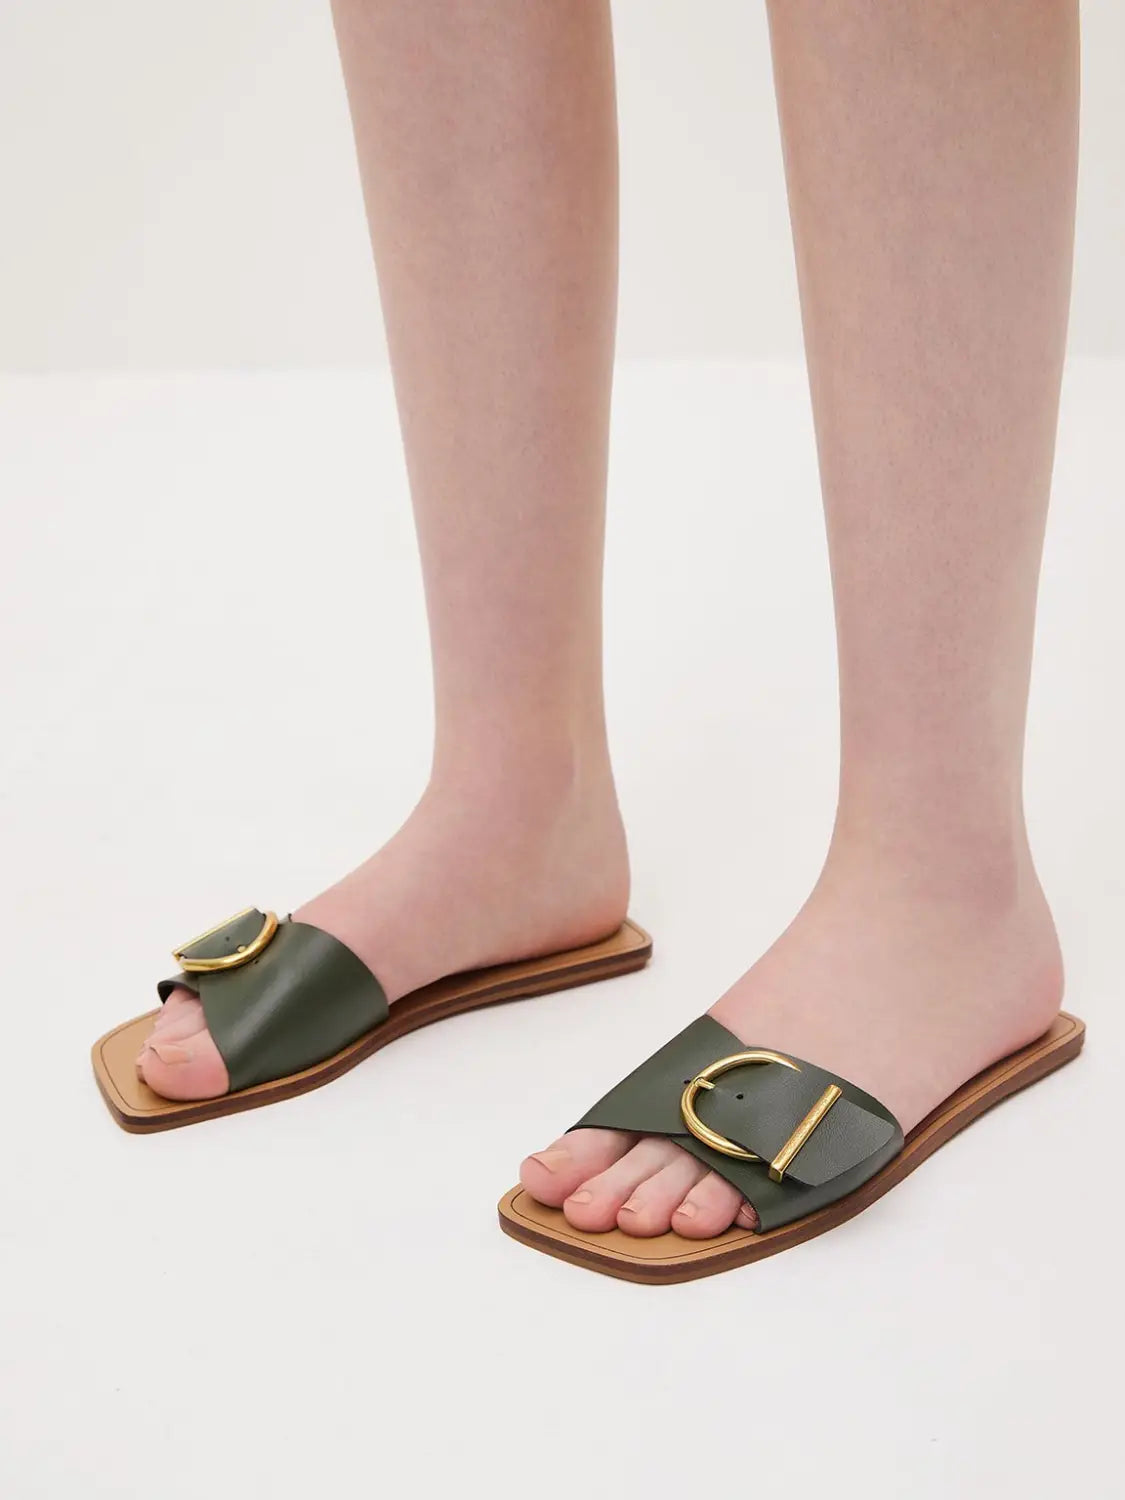 Flat Heel Sandals: 7 Comfortable and Stylish Picks for Everyday Wear